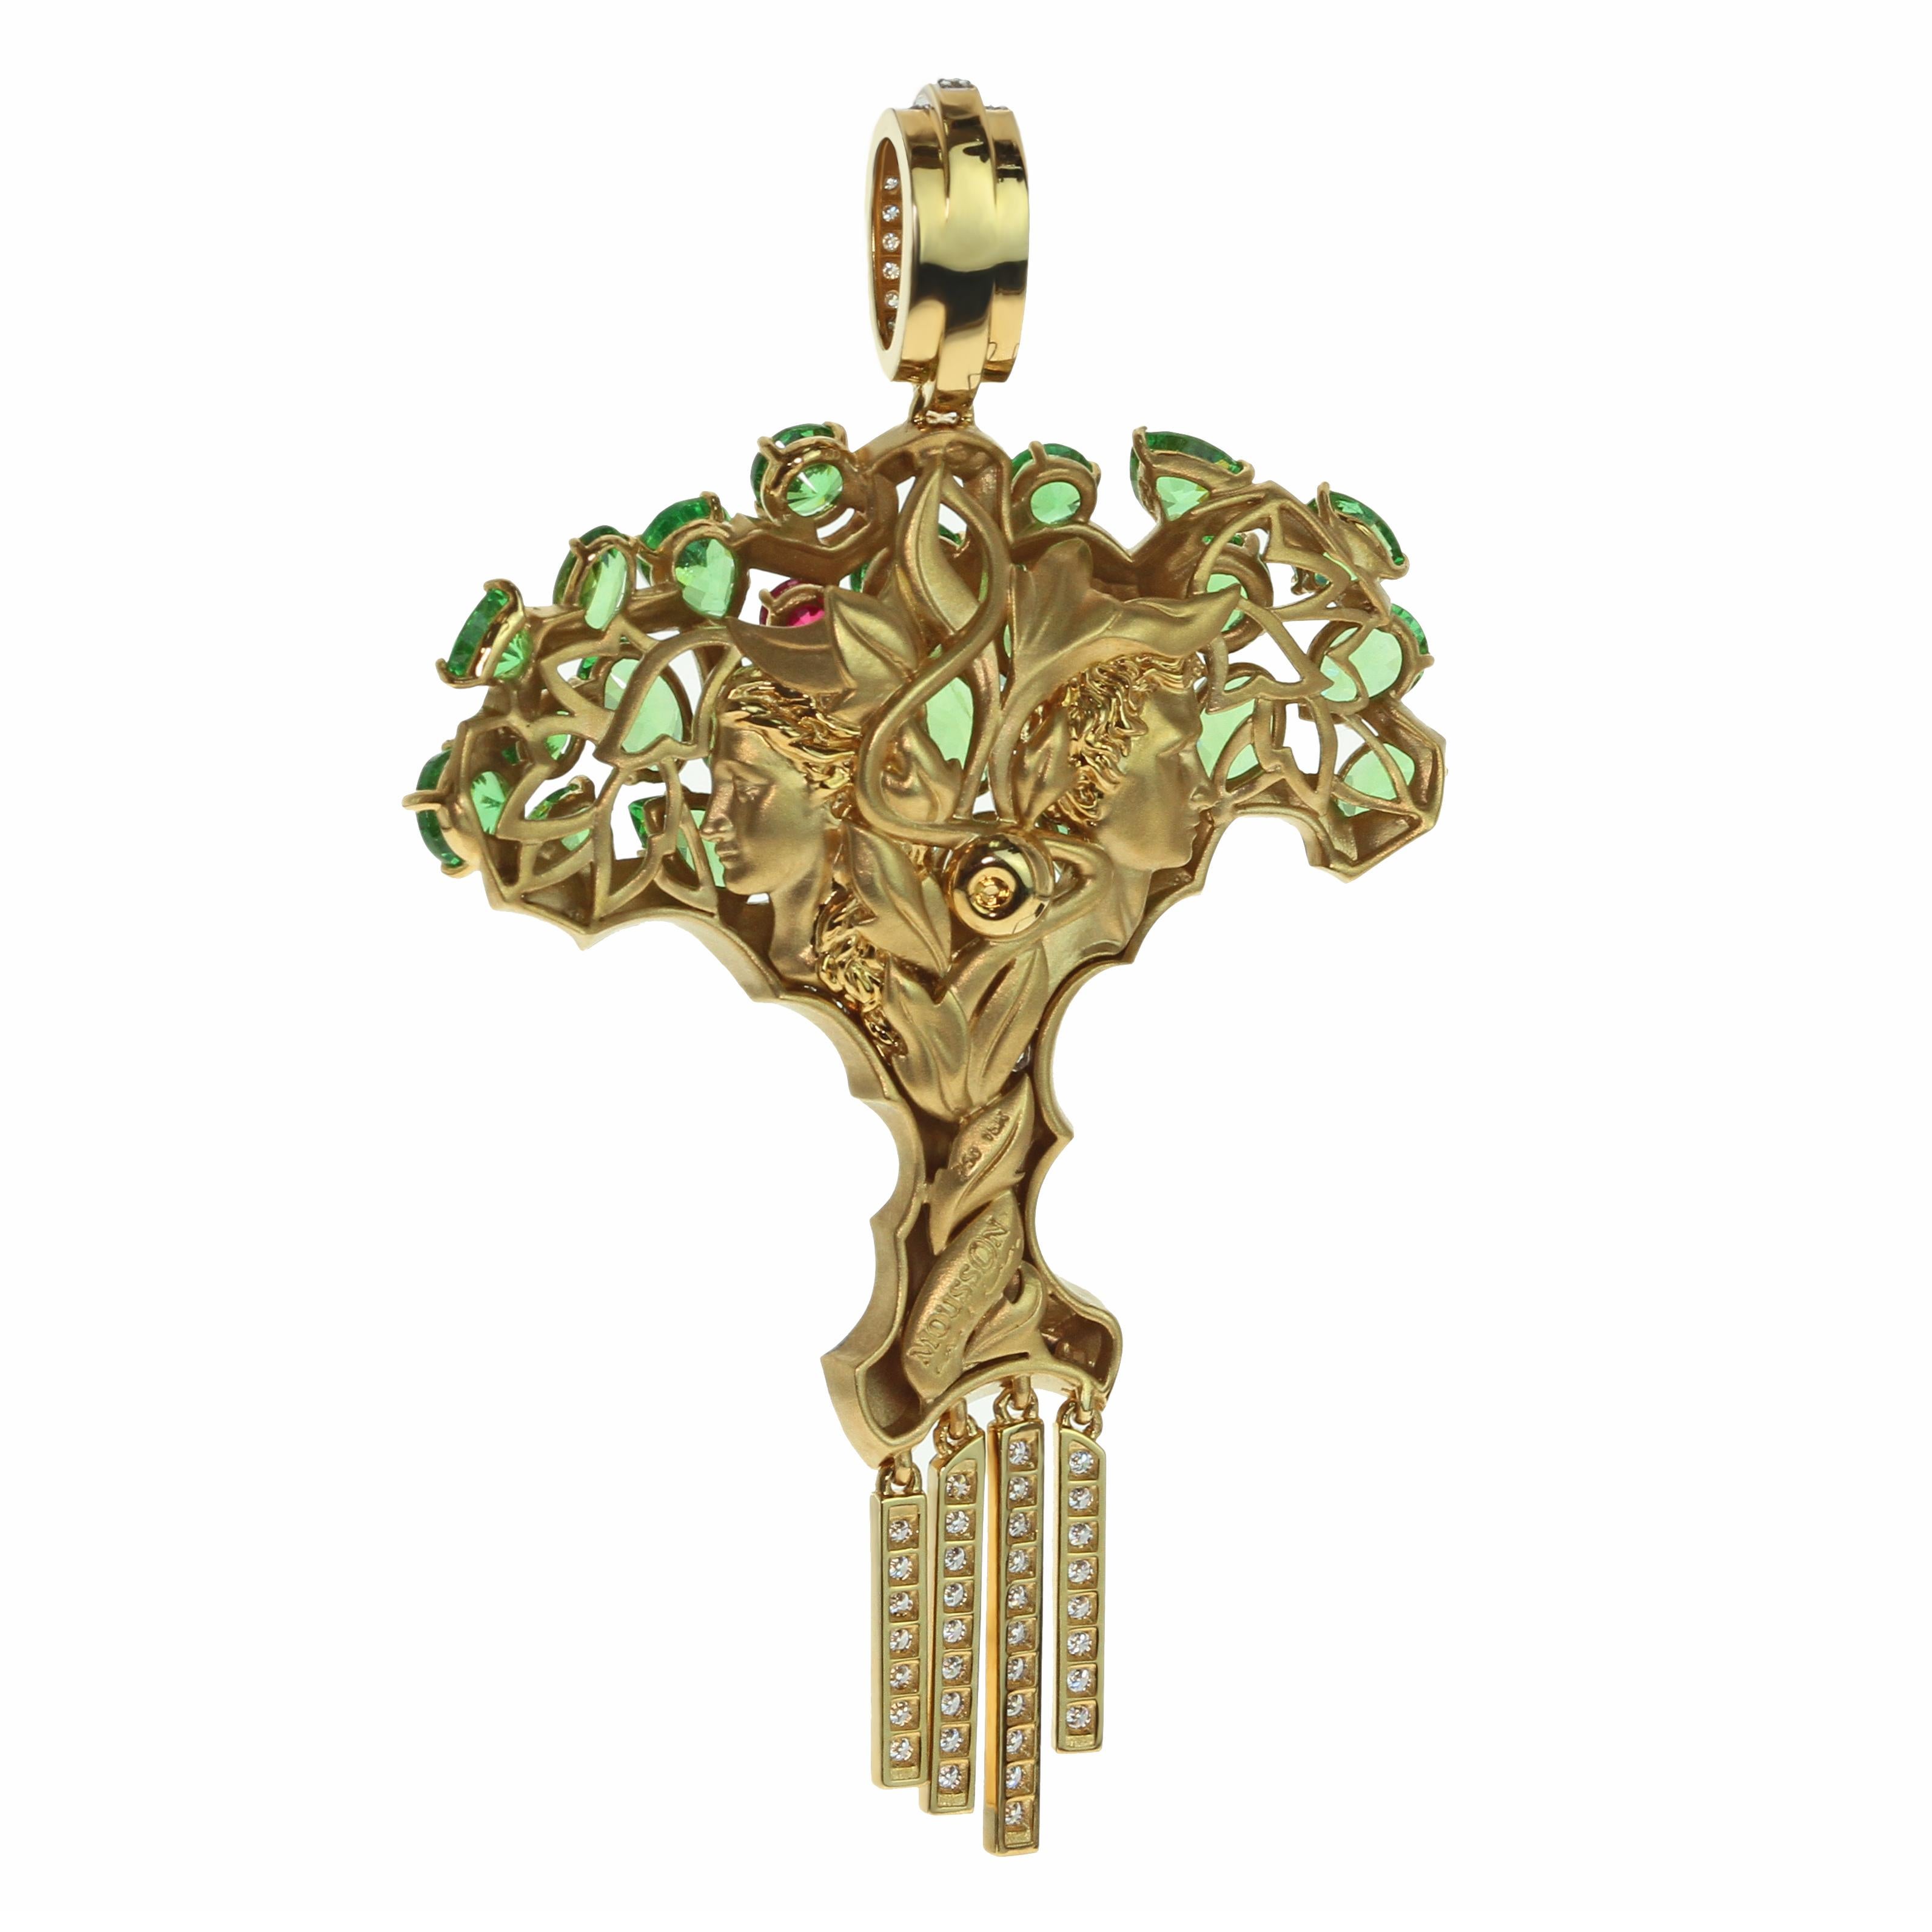 Diamond Tsavorite 18 Karat Yellow Gold Eden Tree Pendant
Everybody knows the story about Eden Tree, the Story of Life. 
Now you also can see how It looks like. Tsavorites as the leafs, Ruby as the Apple and Diamonds Symbolised the roots. On the back